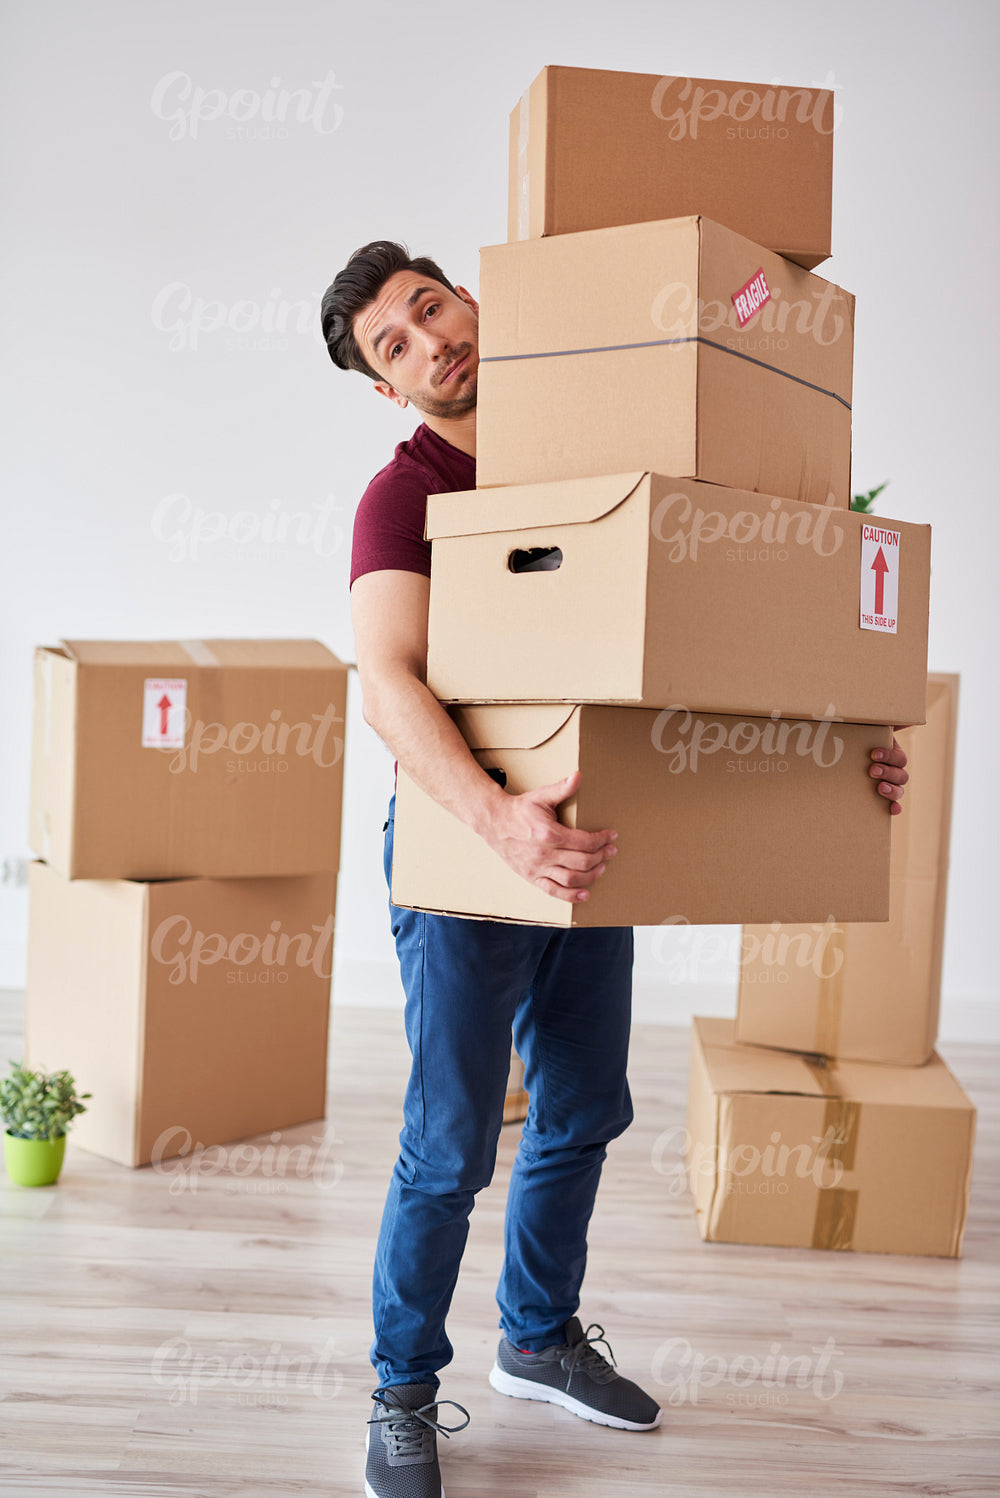 Portrait of man carrying stack of heavy cardboard boxes